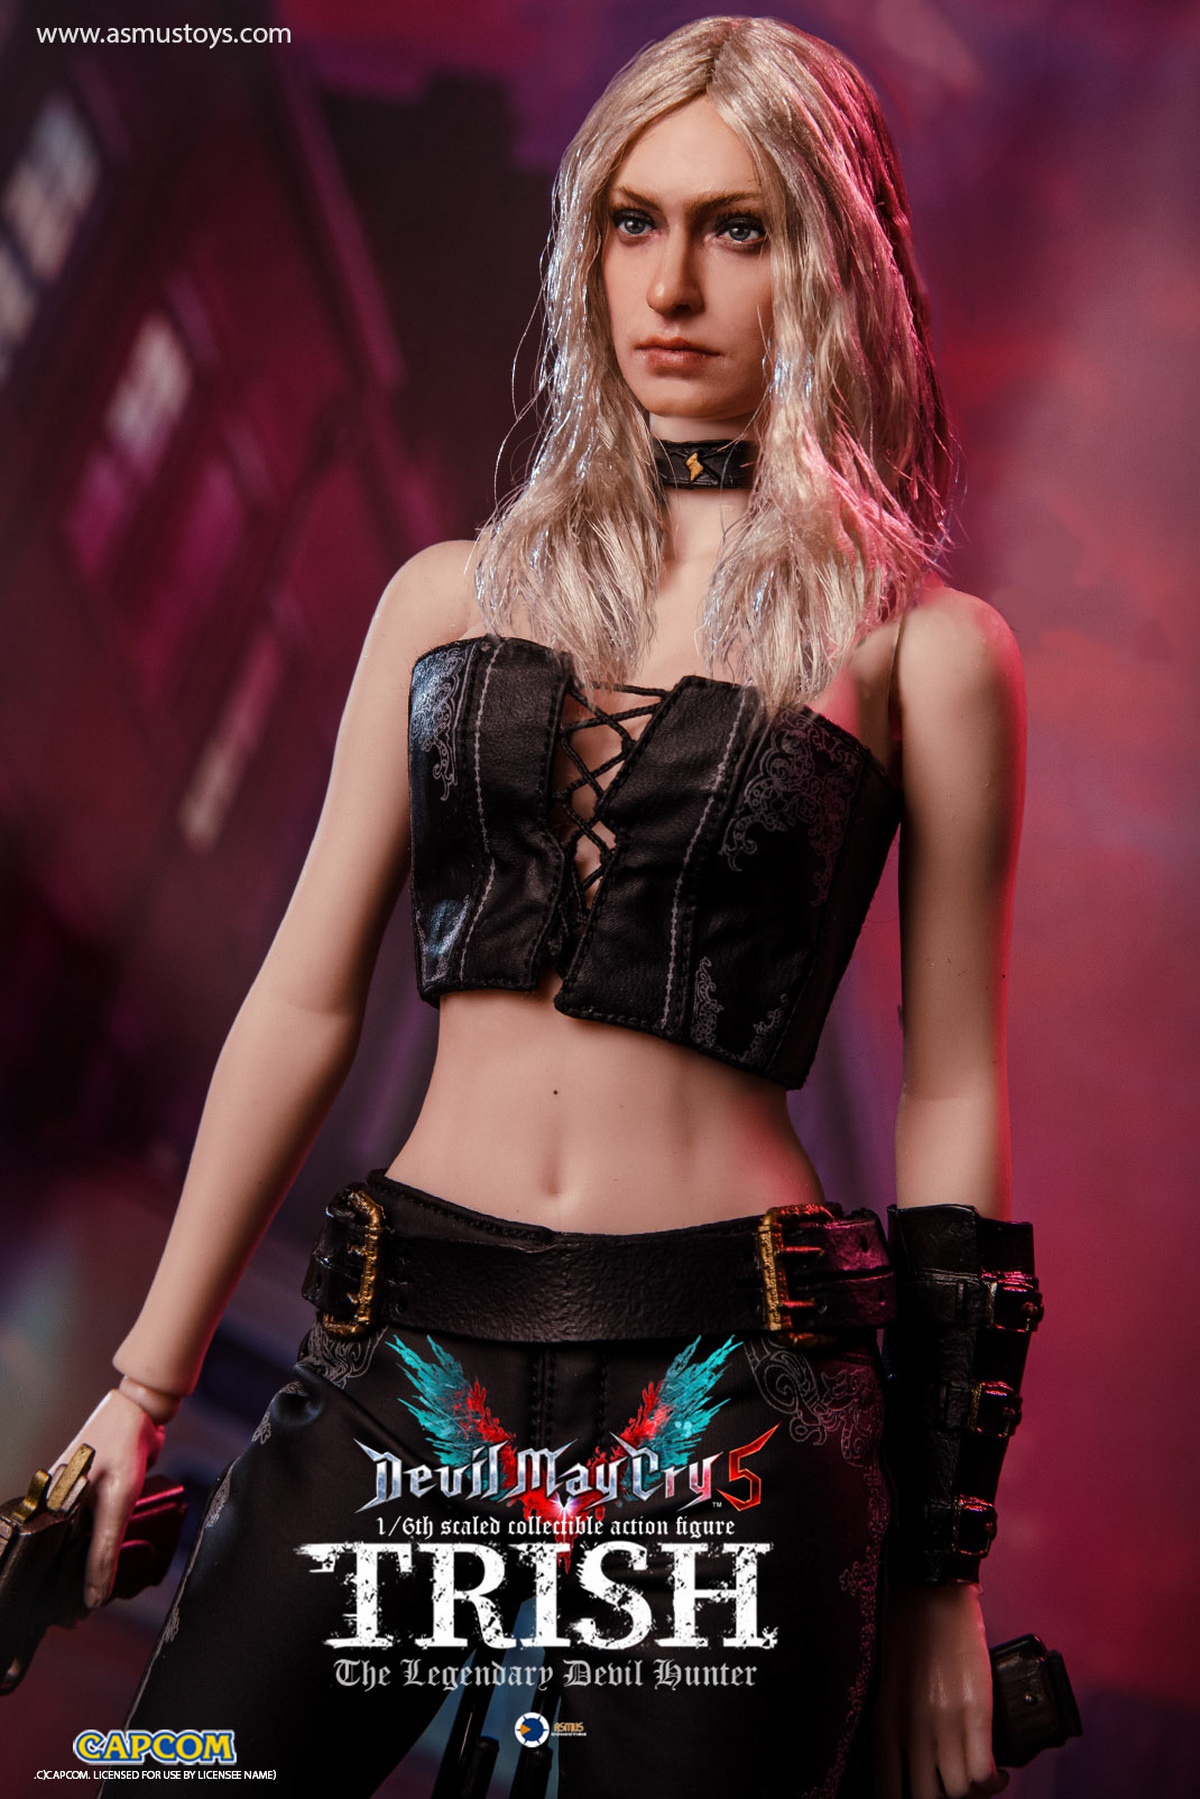 NEW PRODUCT: Asmus New Toys: "Devil May Cry 5" - Trish (DMC504) 0623